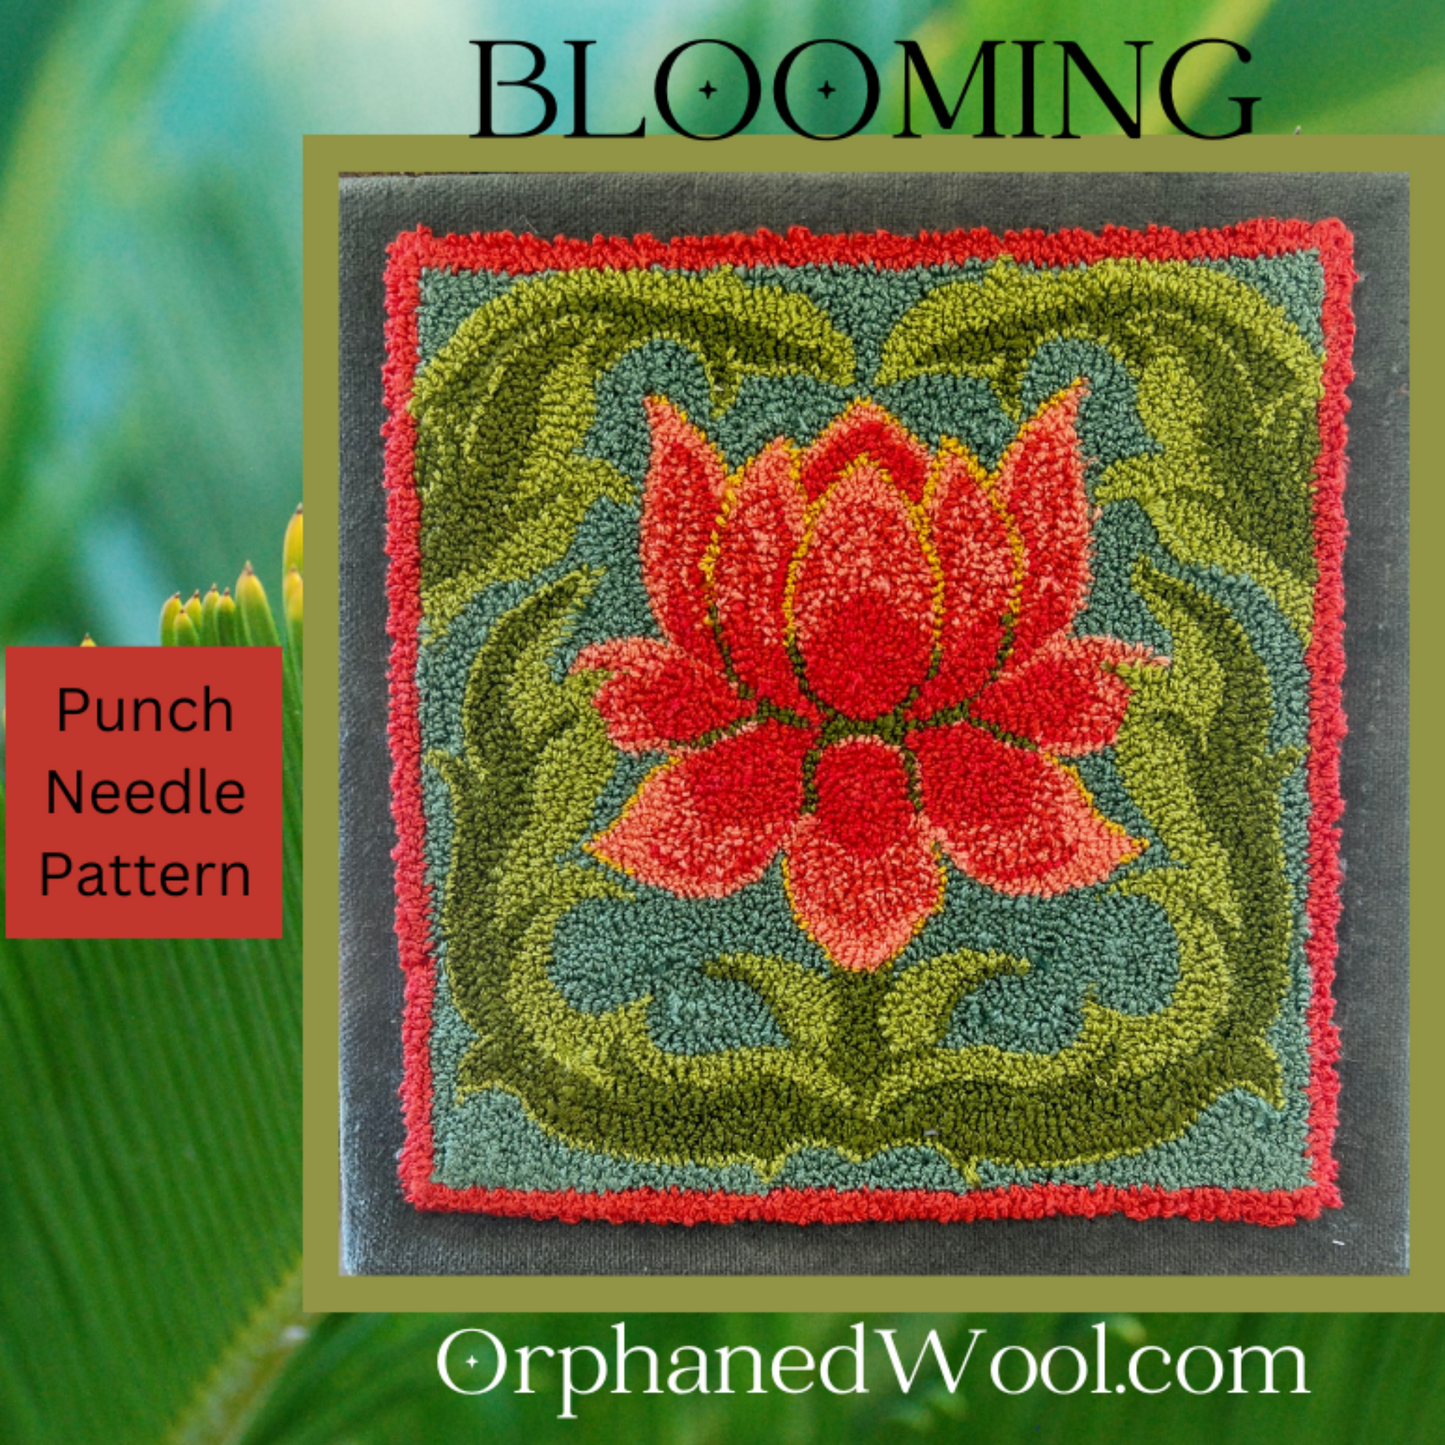  Blooming -PDF Digital Download Punch Needle Pattern by Orphaned Wool. This is a 4 page digital download floral pattern, Copyright 2023 Kelly Kanyok / Orphaned Wool. Enjoy creating this lovely and useful pattern into a wonderful key or jewelry hanger design. Created using DMC floss and a Punch Needle. The perfect beginners project to get you started in this wonderful art form.